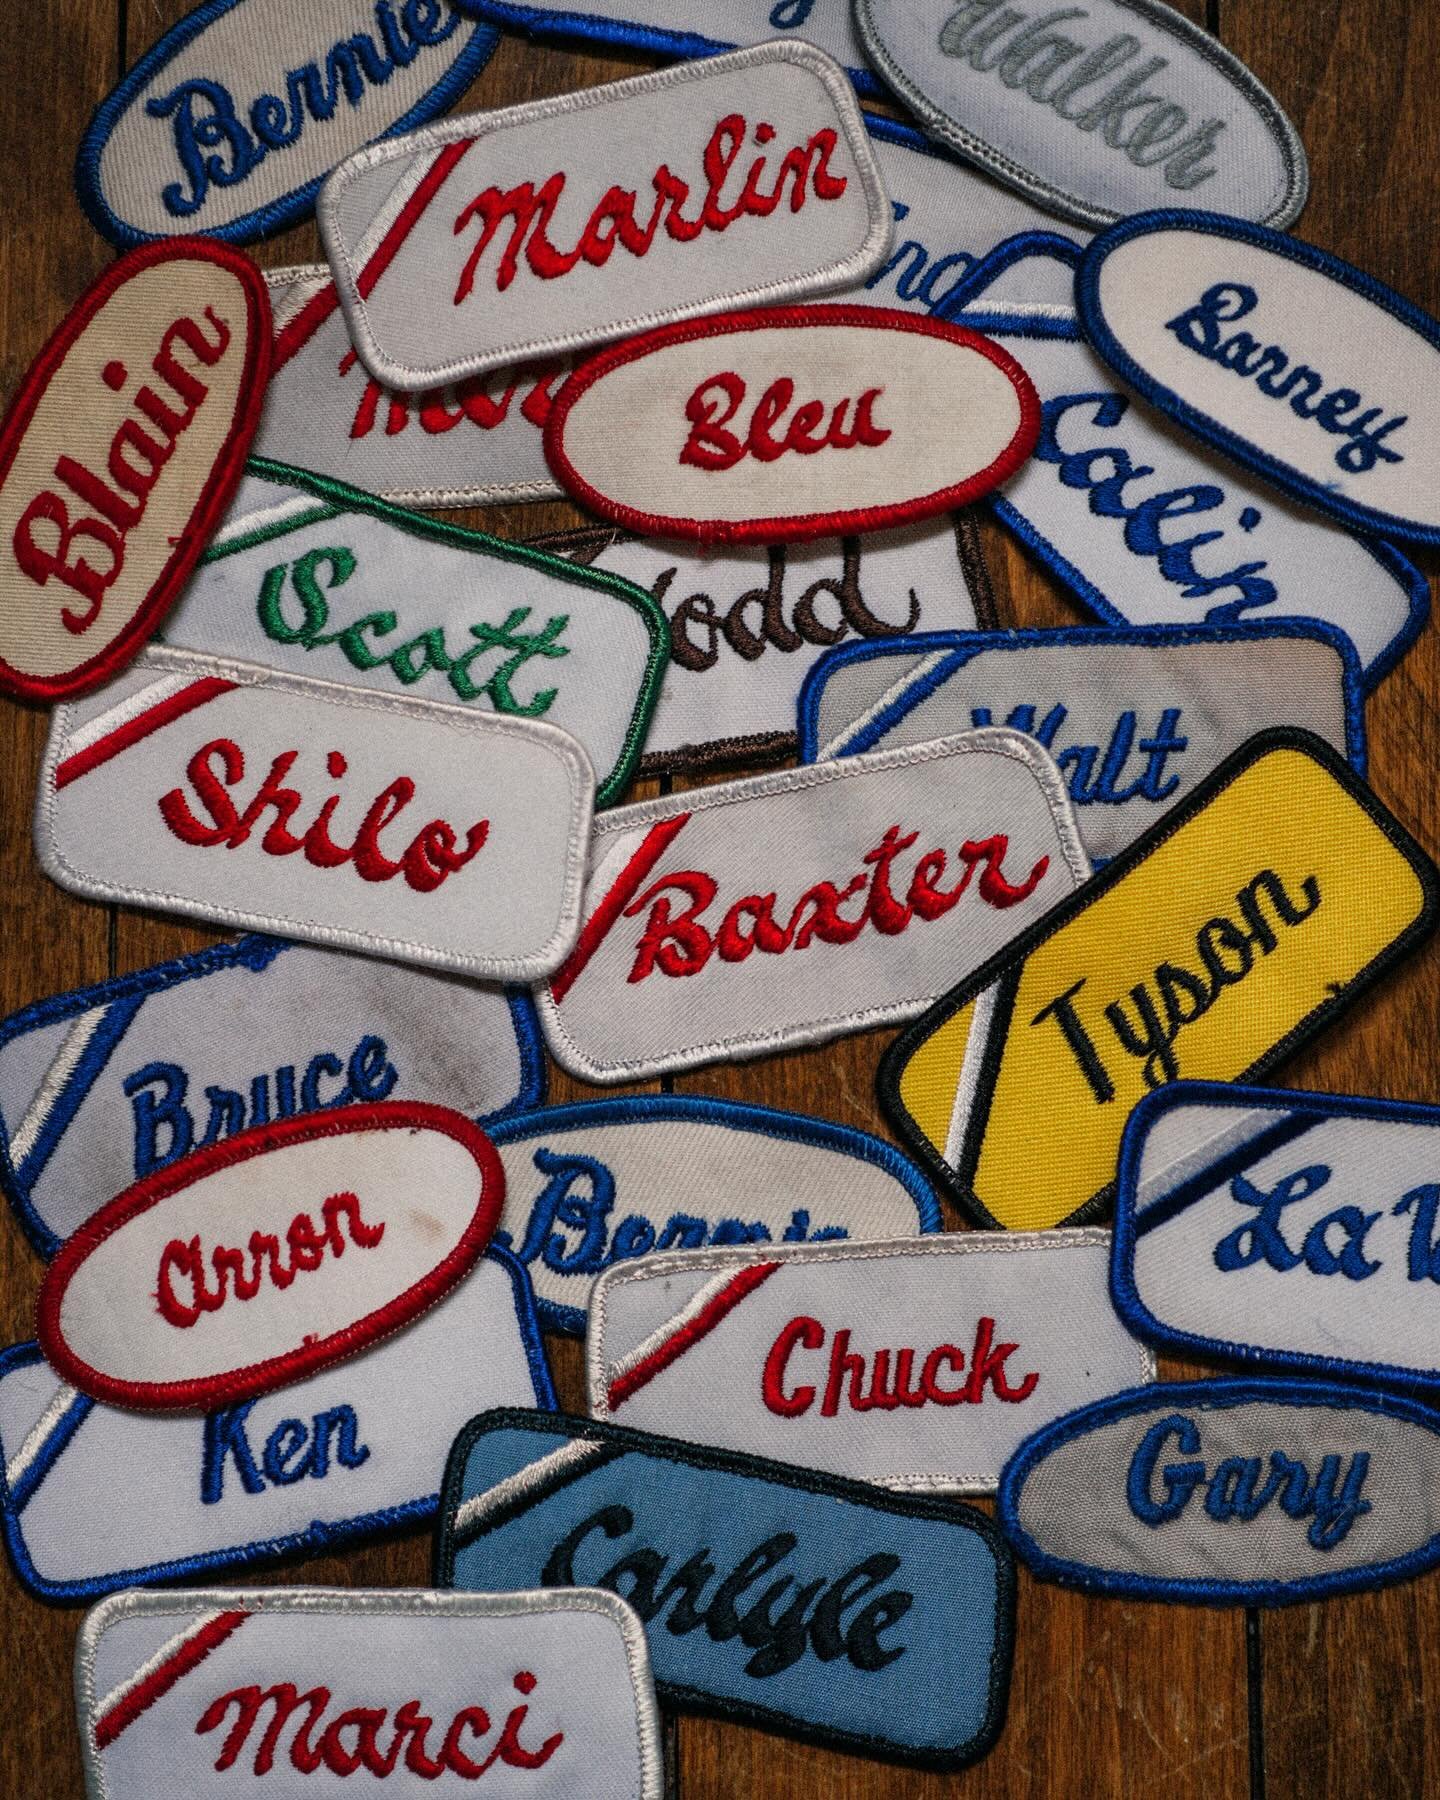 Fresh vintage mechanics patches are in the shop! Swipe to alphabetize em ✨

We have more than what&rsquo;s pictured, these were just some of our favorites!

#wildwanderer #wildwanderermt #montanavintage #vintagepatches #vintageshops #columbiafalls #c